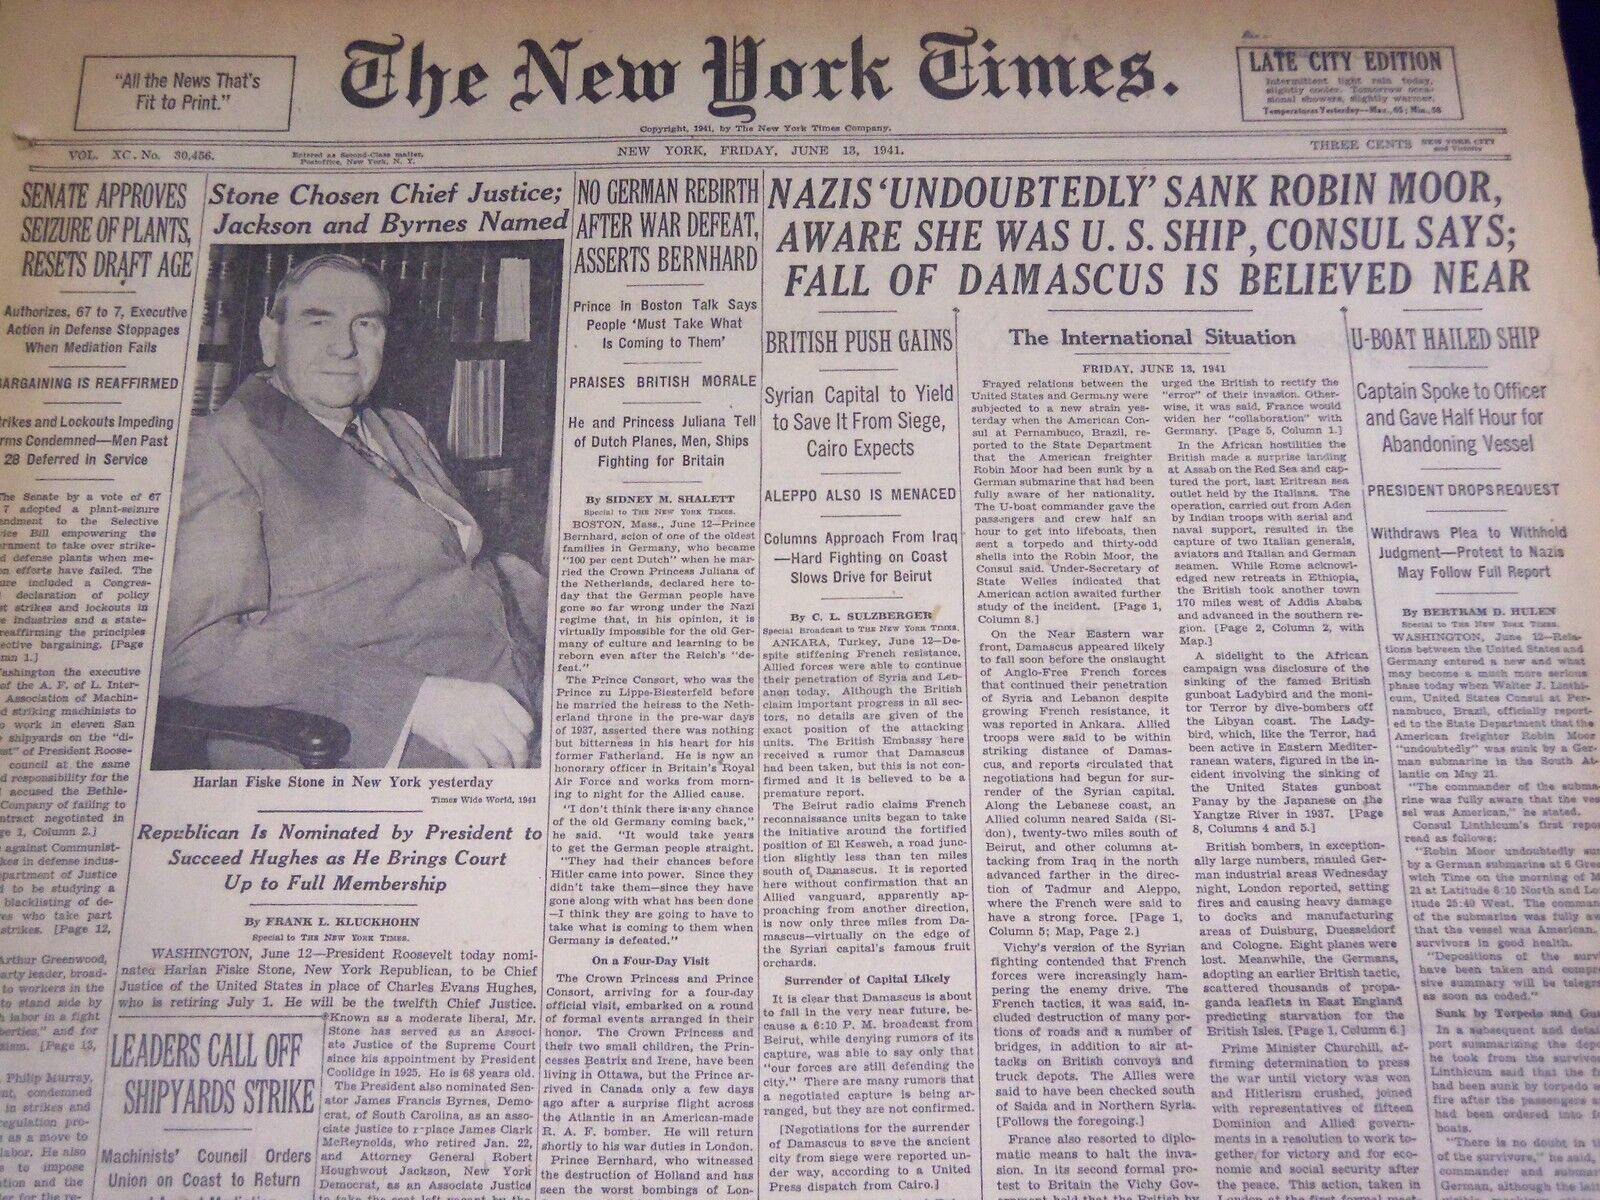 1941 JUNE 13 NEW YORK TIMES - HARLAN STONE CHOSEN CHIEF JUSTICE - NT 1464